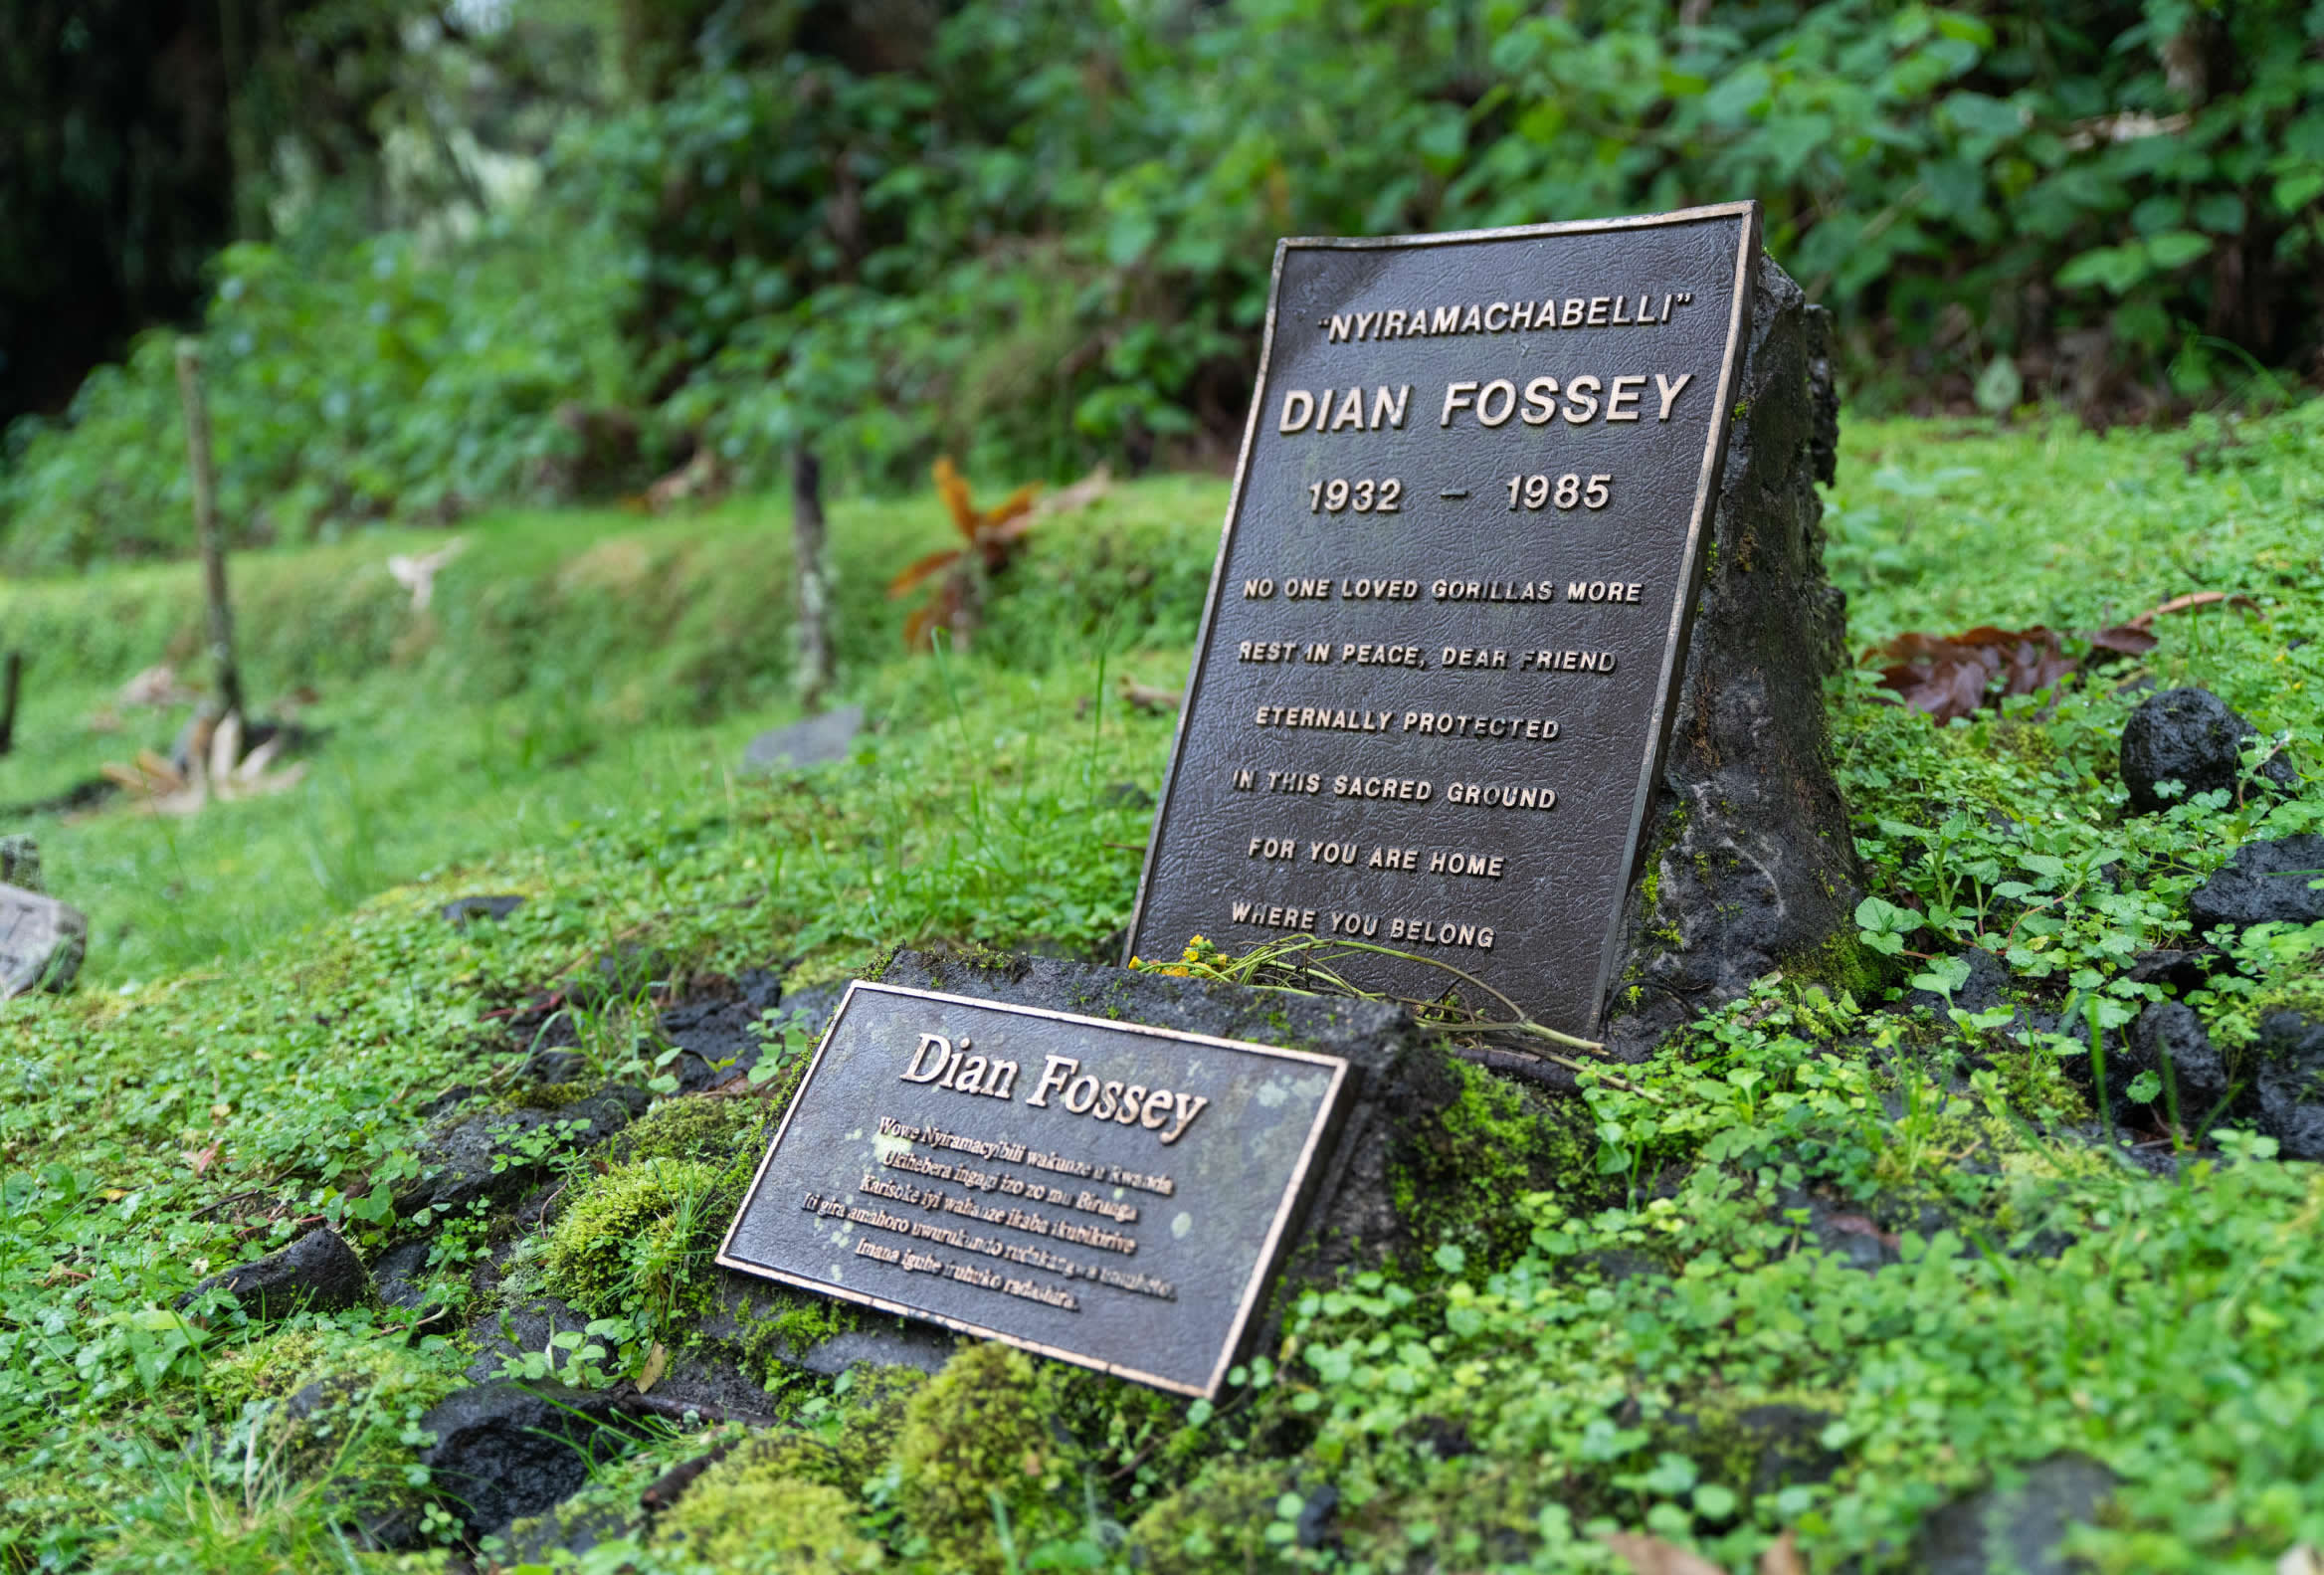 Located within the confines of Volcanoes National Park in Rwanda, Dian Fossey's tomb serves as a poignant reminder of her profound impact on gorilla conservation and her ultimate sacrifice in defense of these remarkable animals. Situated near the Karisoke Research Center, where Fossey spent decades studying 